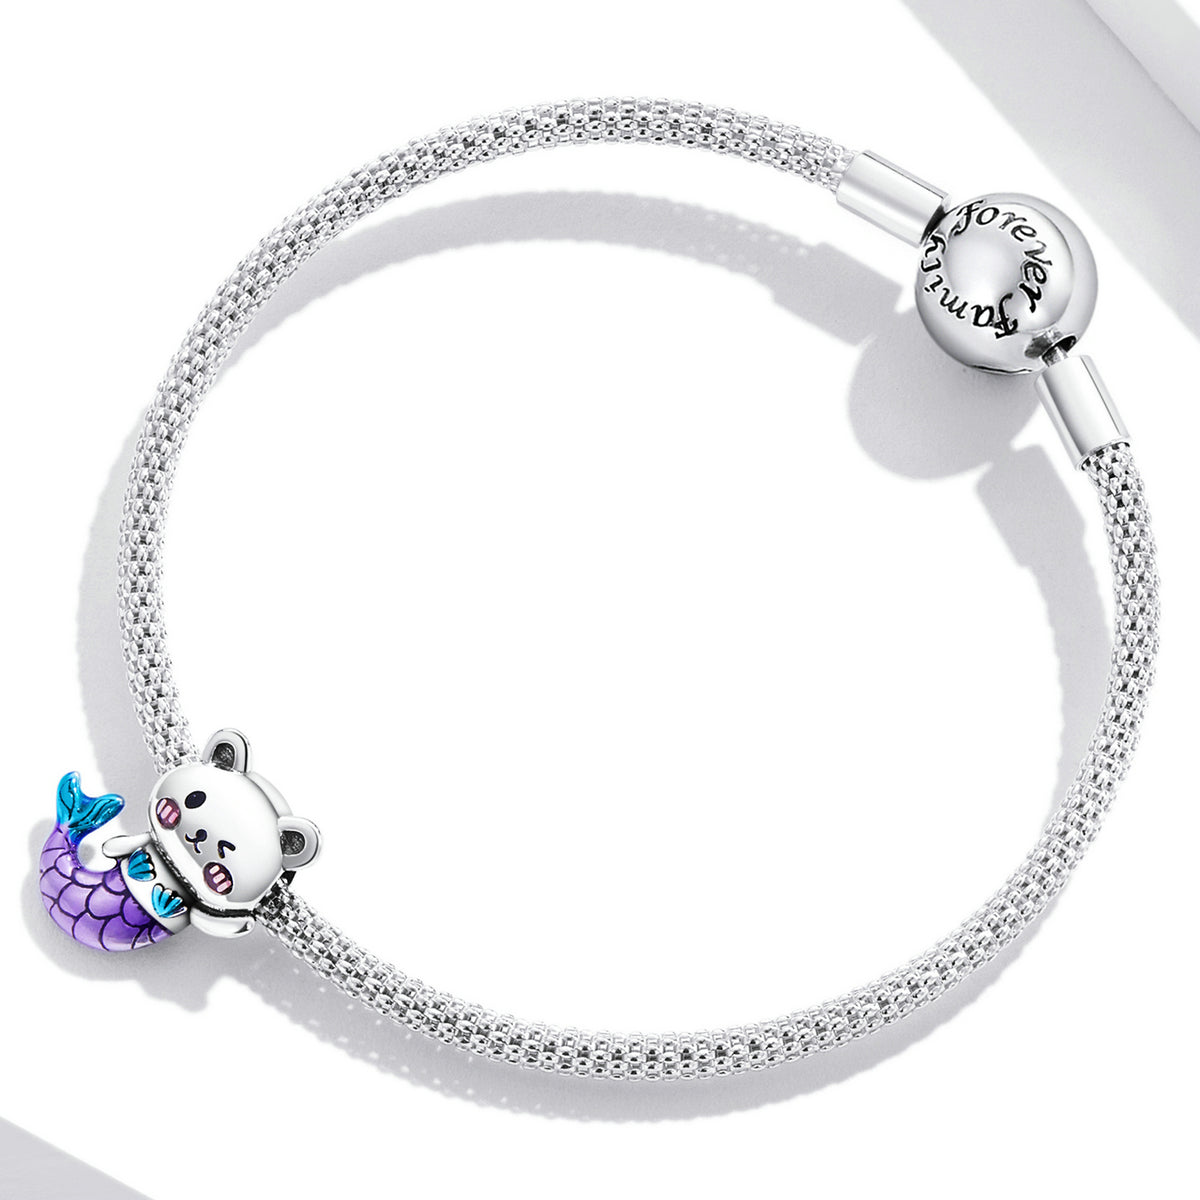 Mignon Ours Sirène Animaux Charme Perles Argent Sterling